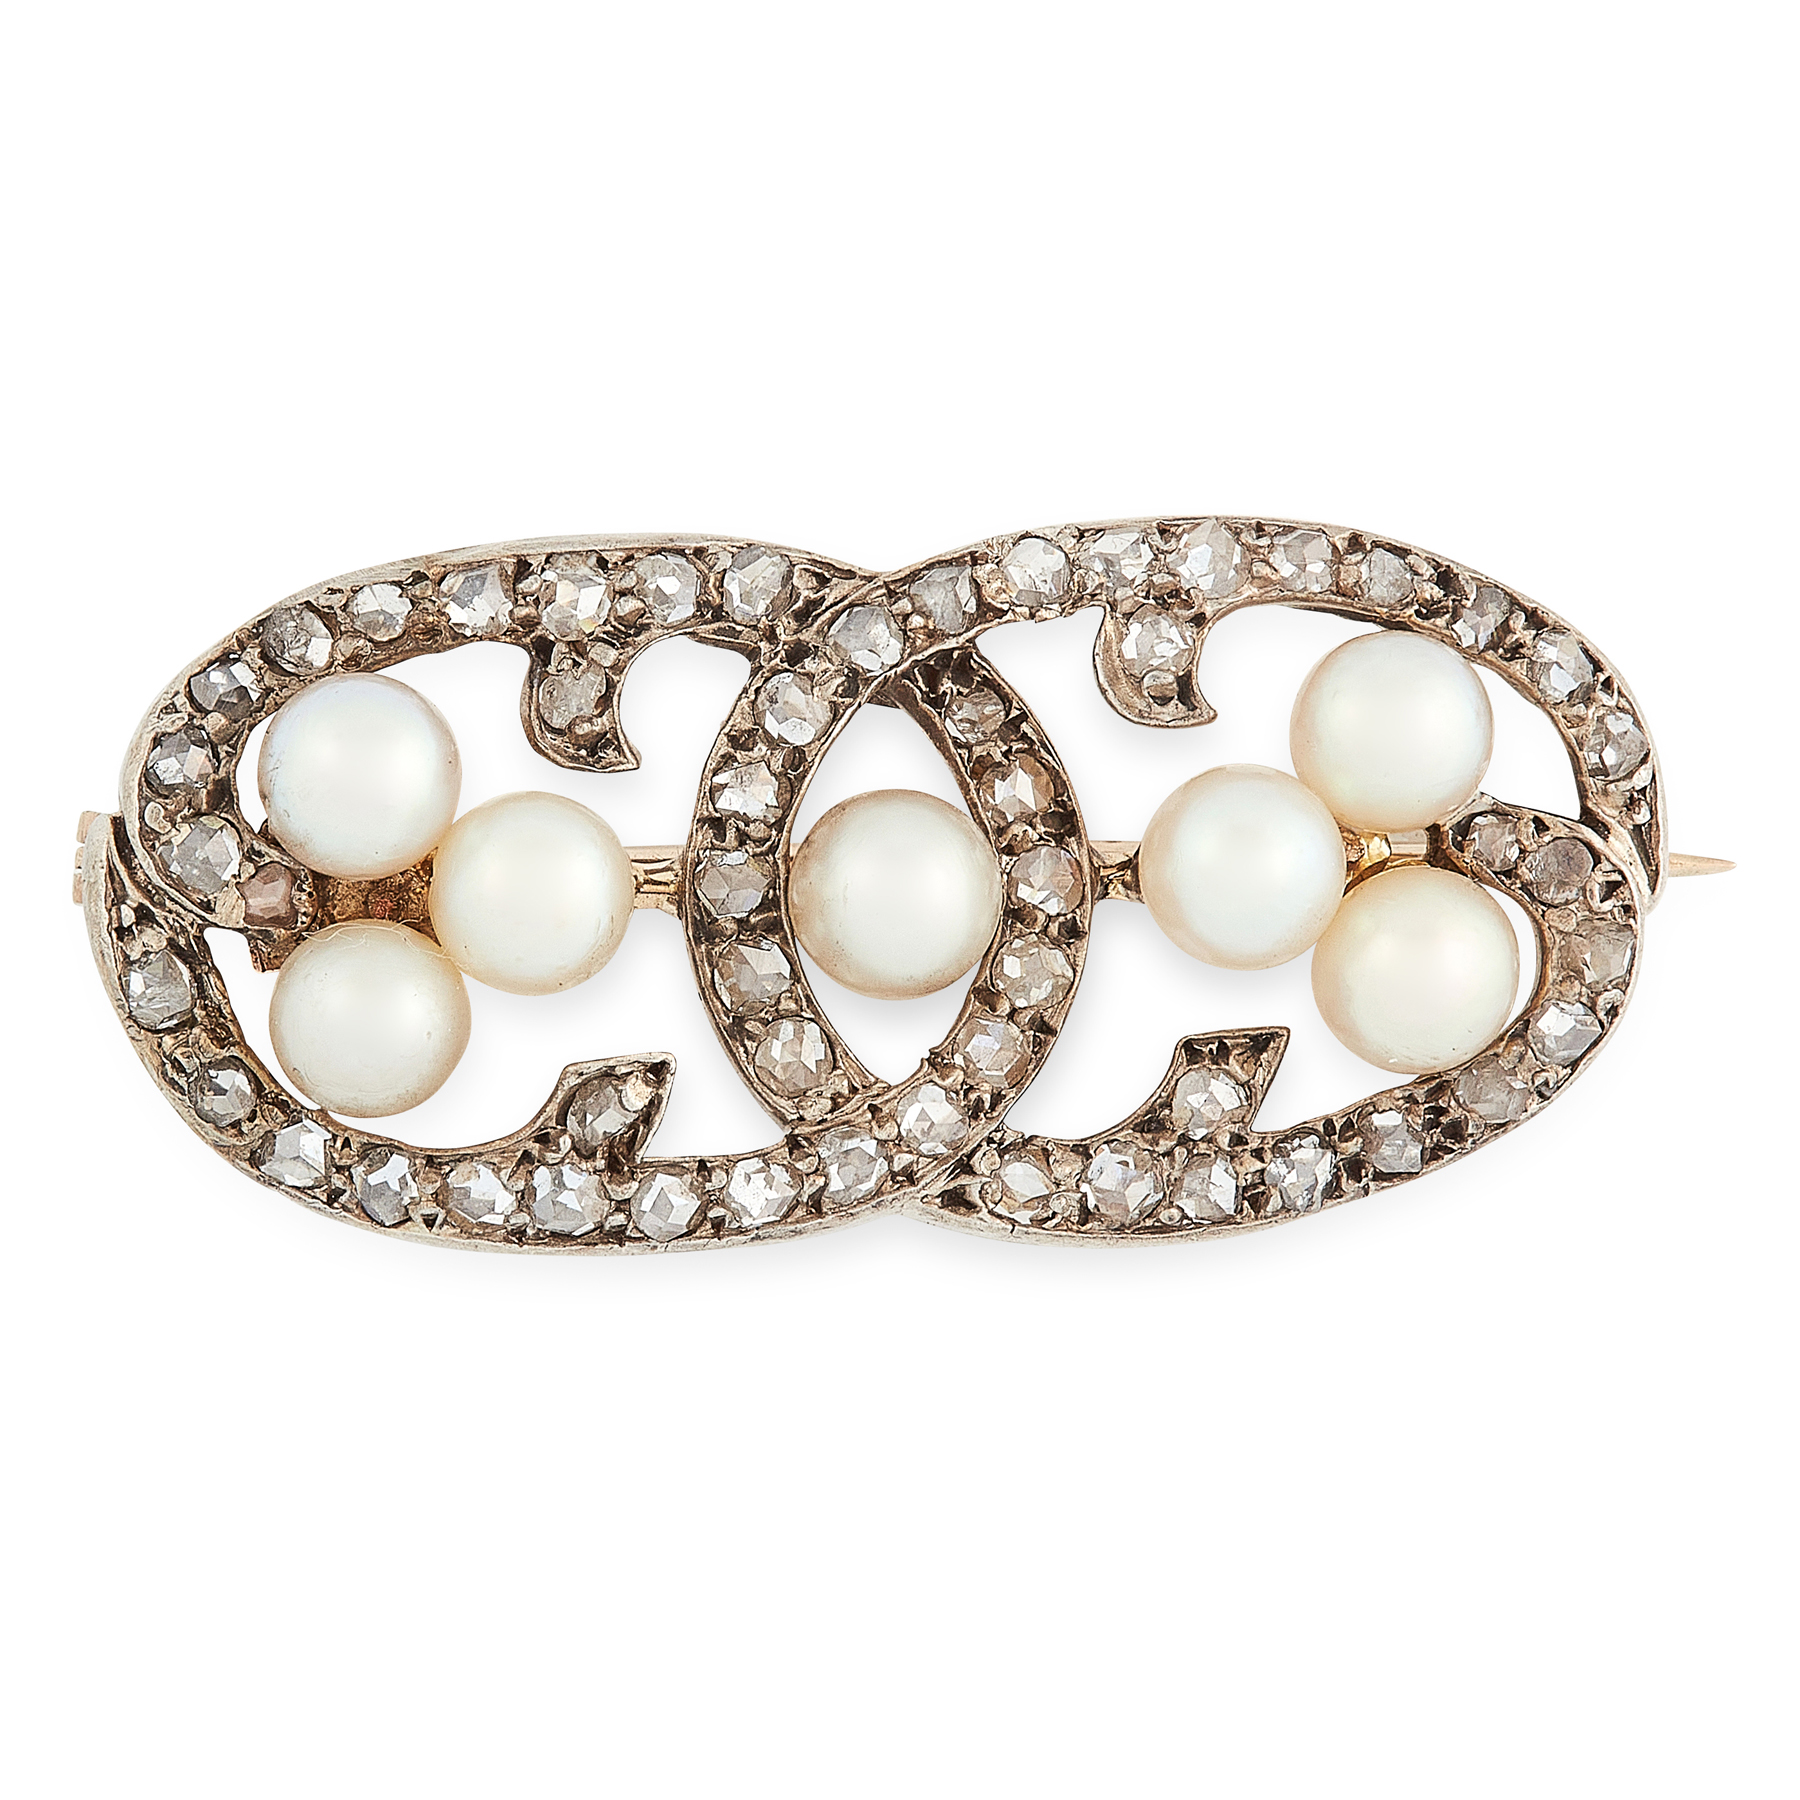 AN ANTIQUE PEARL AND DIAMOND BROOCH in yellow gold and silver, designed as two overlapping ovals,